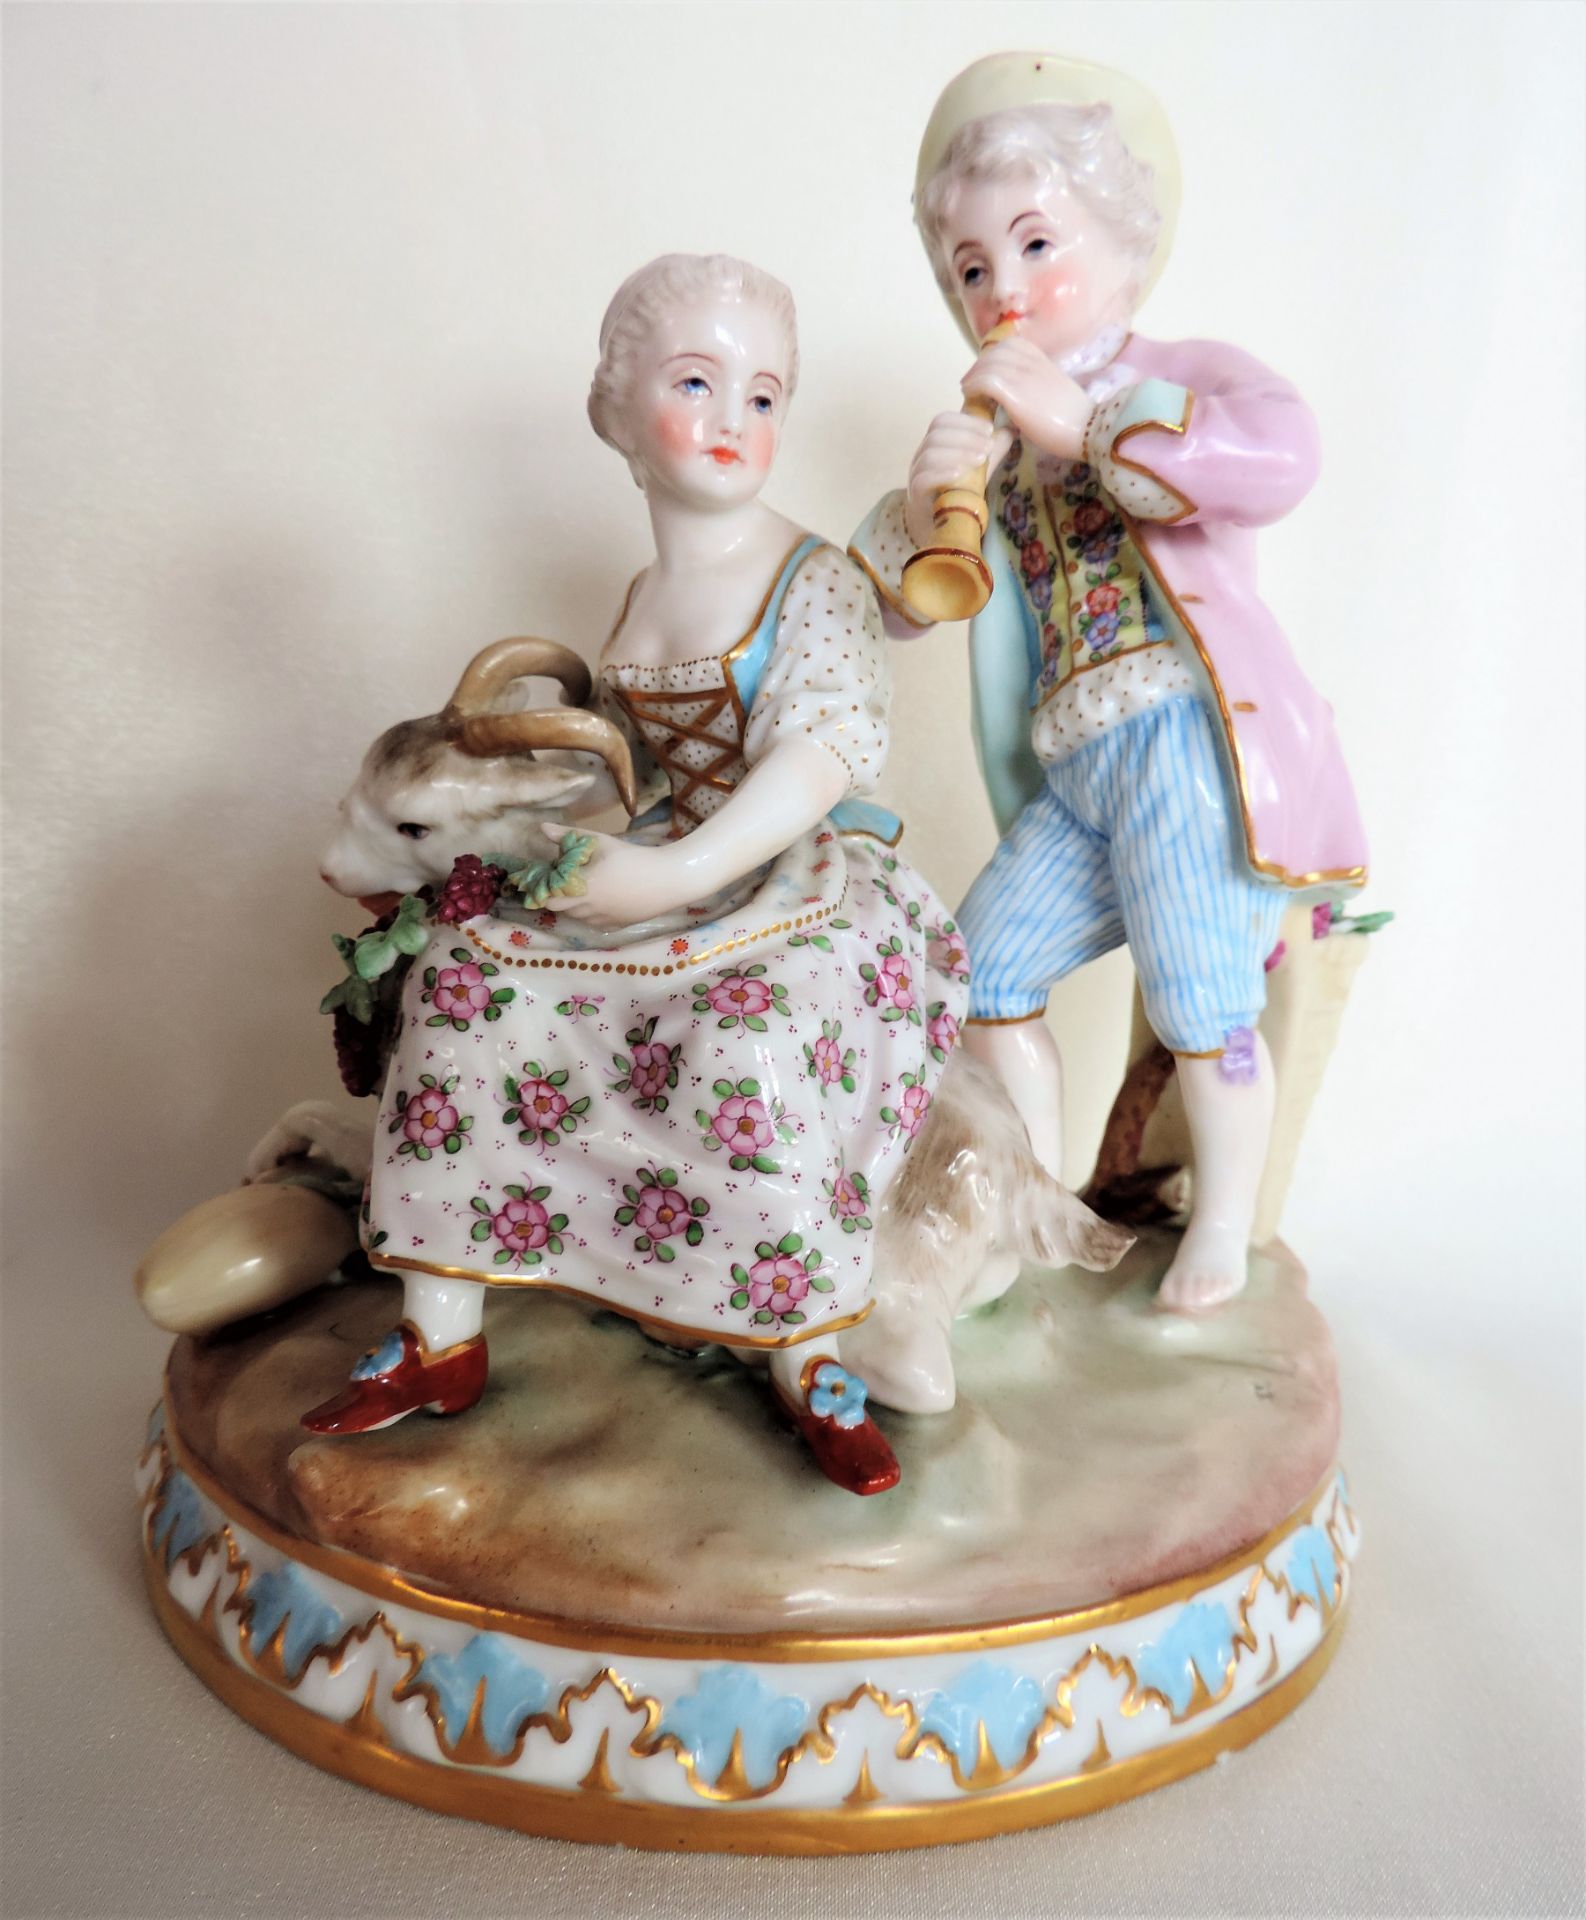 Antique German Porcelain Figurine in the Meissen Style - Image 7 of 8